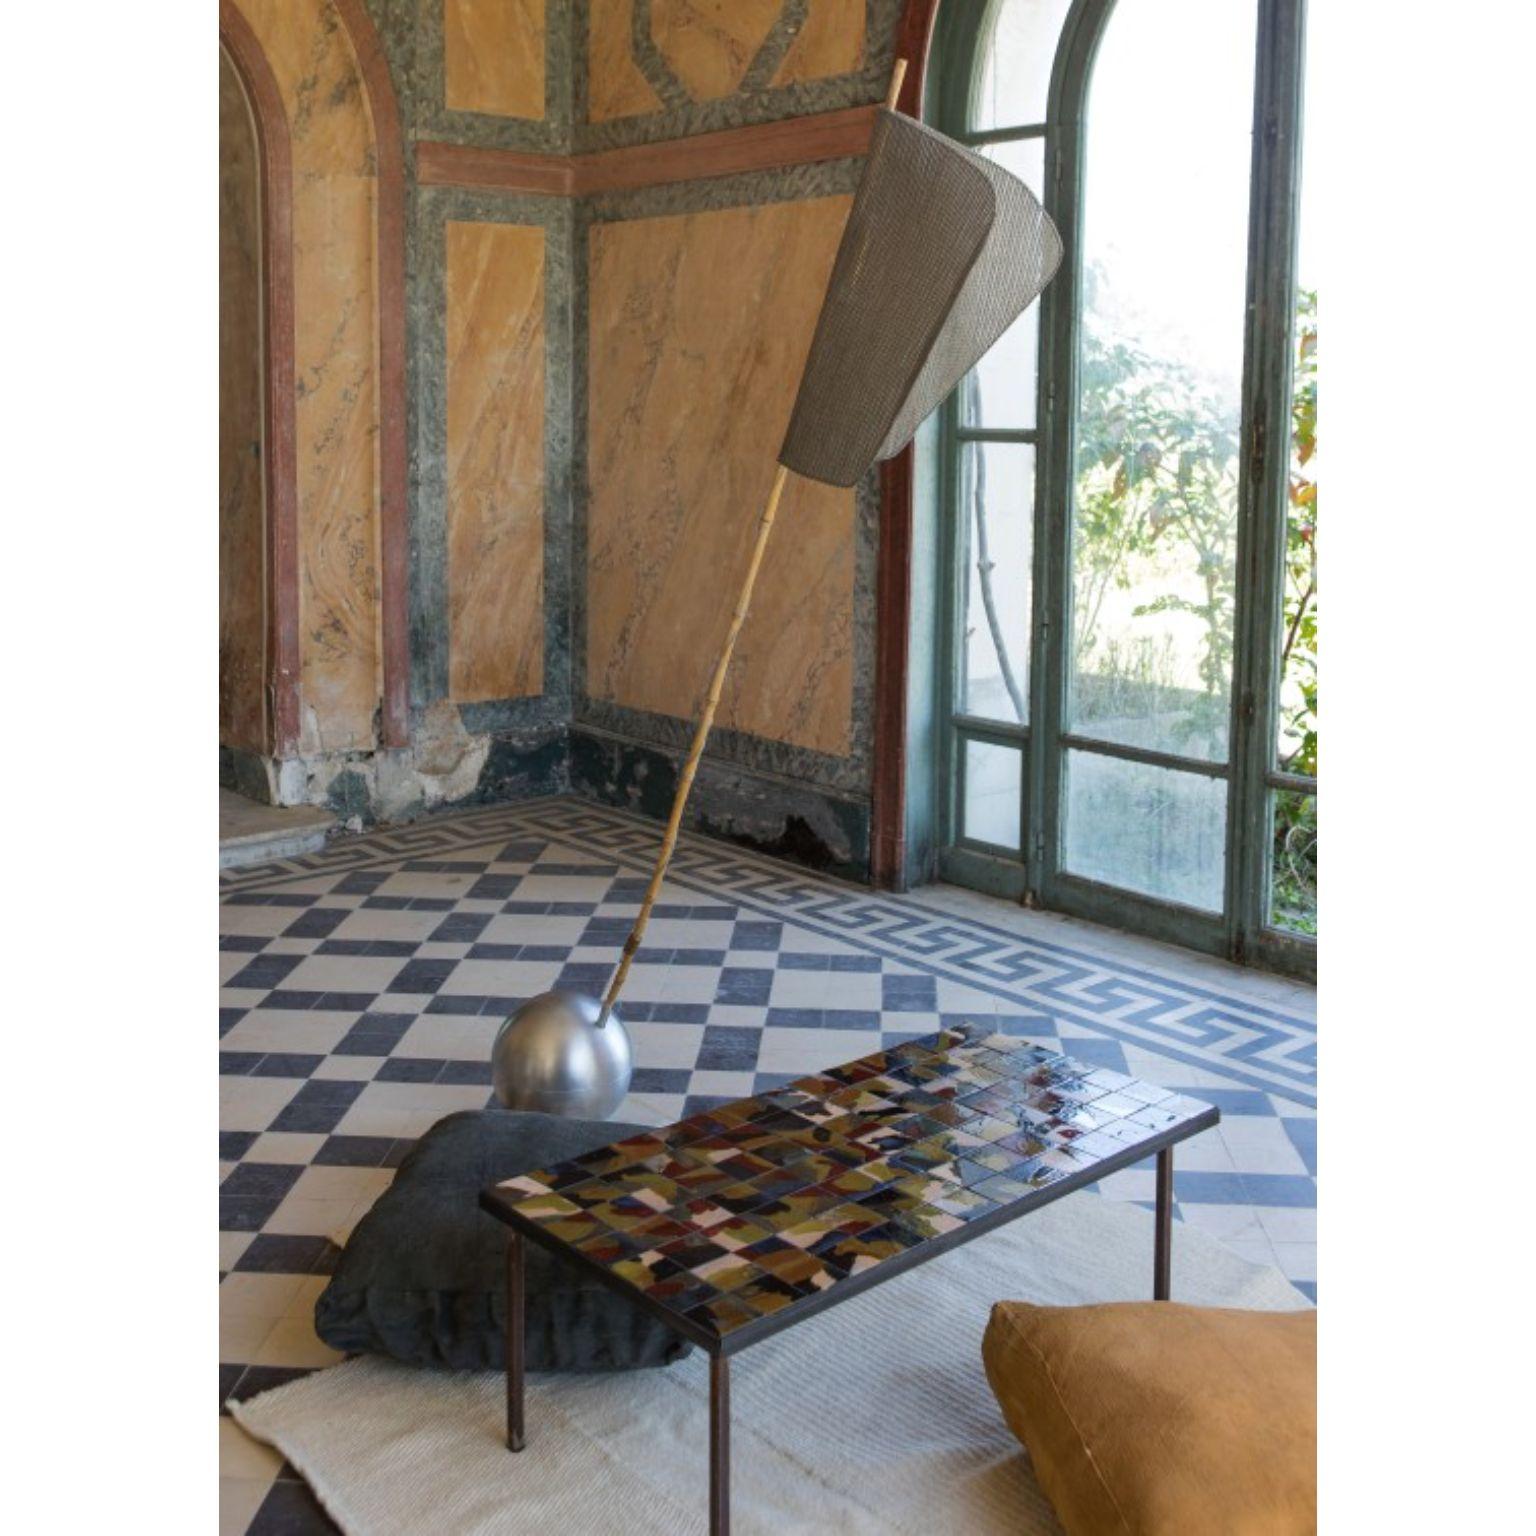 L'Orée Coffee Table by Mylene Niedzialkowski
Dimensions: D 52 x W 104 x H 41.
Materials: Sandstone, steel and enamel.

Ceramic tile coffee table made entirely by hand, L'orée is adorned with strong painted shapes with changing details. French